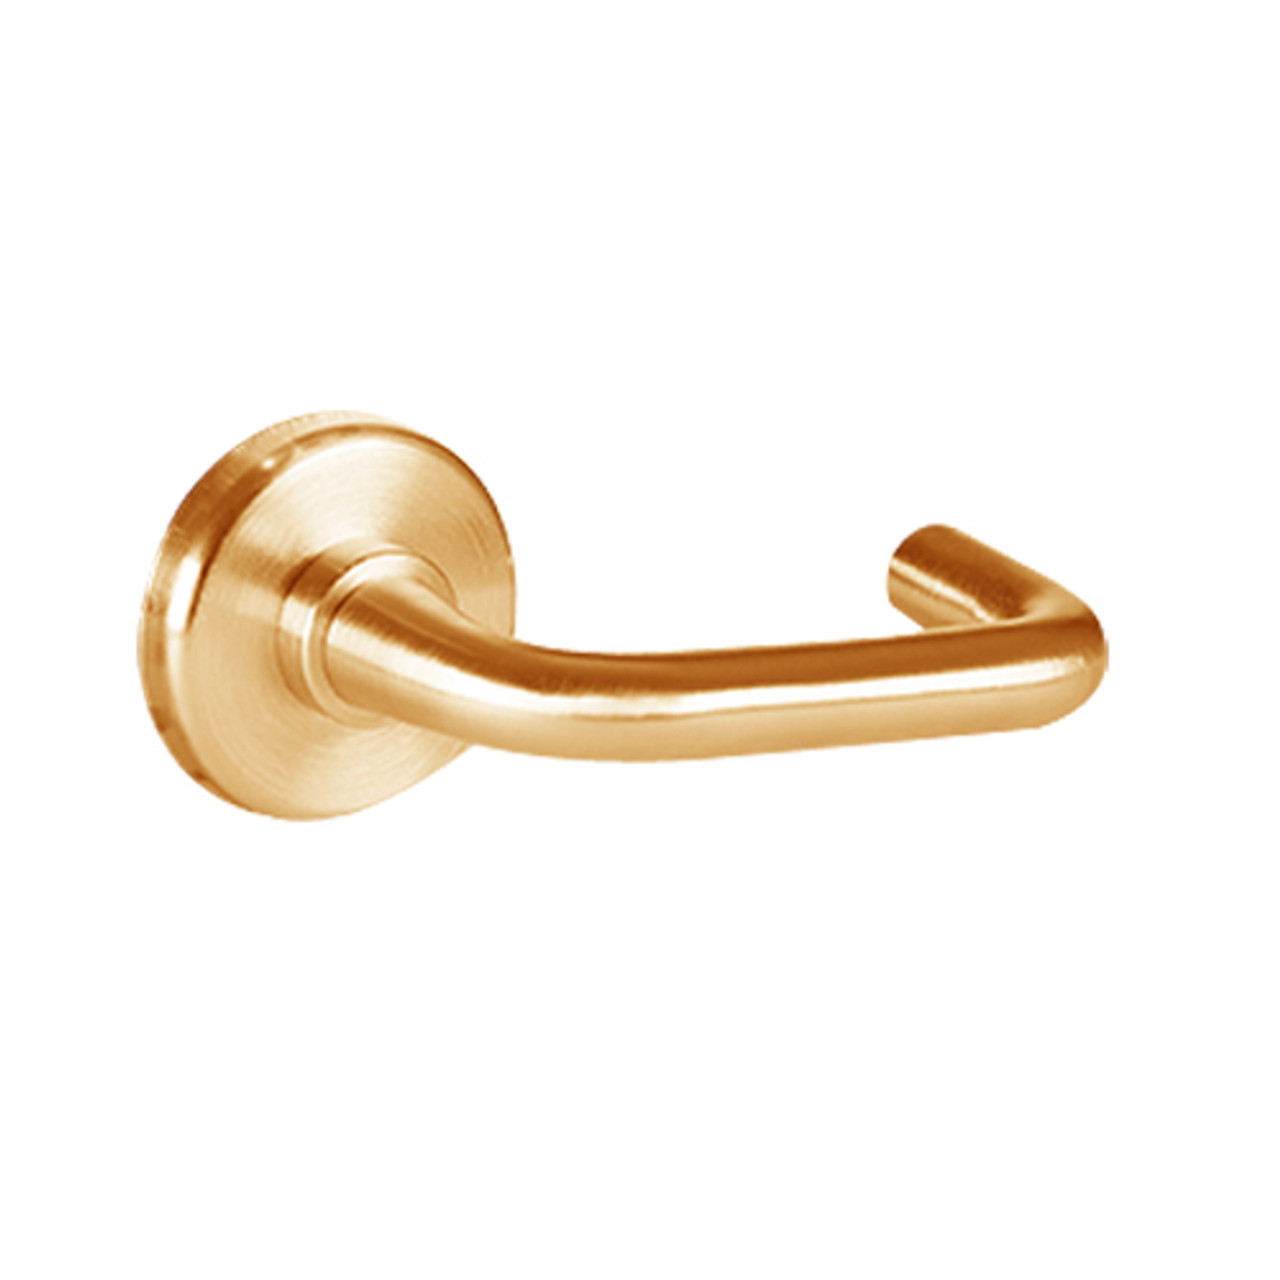 40HTKIS23S612 Best 40H Series Trim Kits Inside Lever w/ turn with Solid Tube-Return Trim Style in Satin Bronze